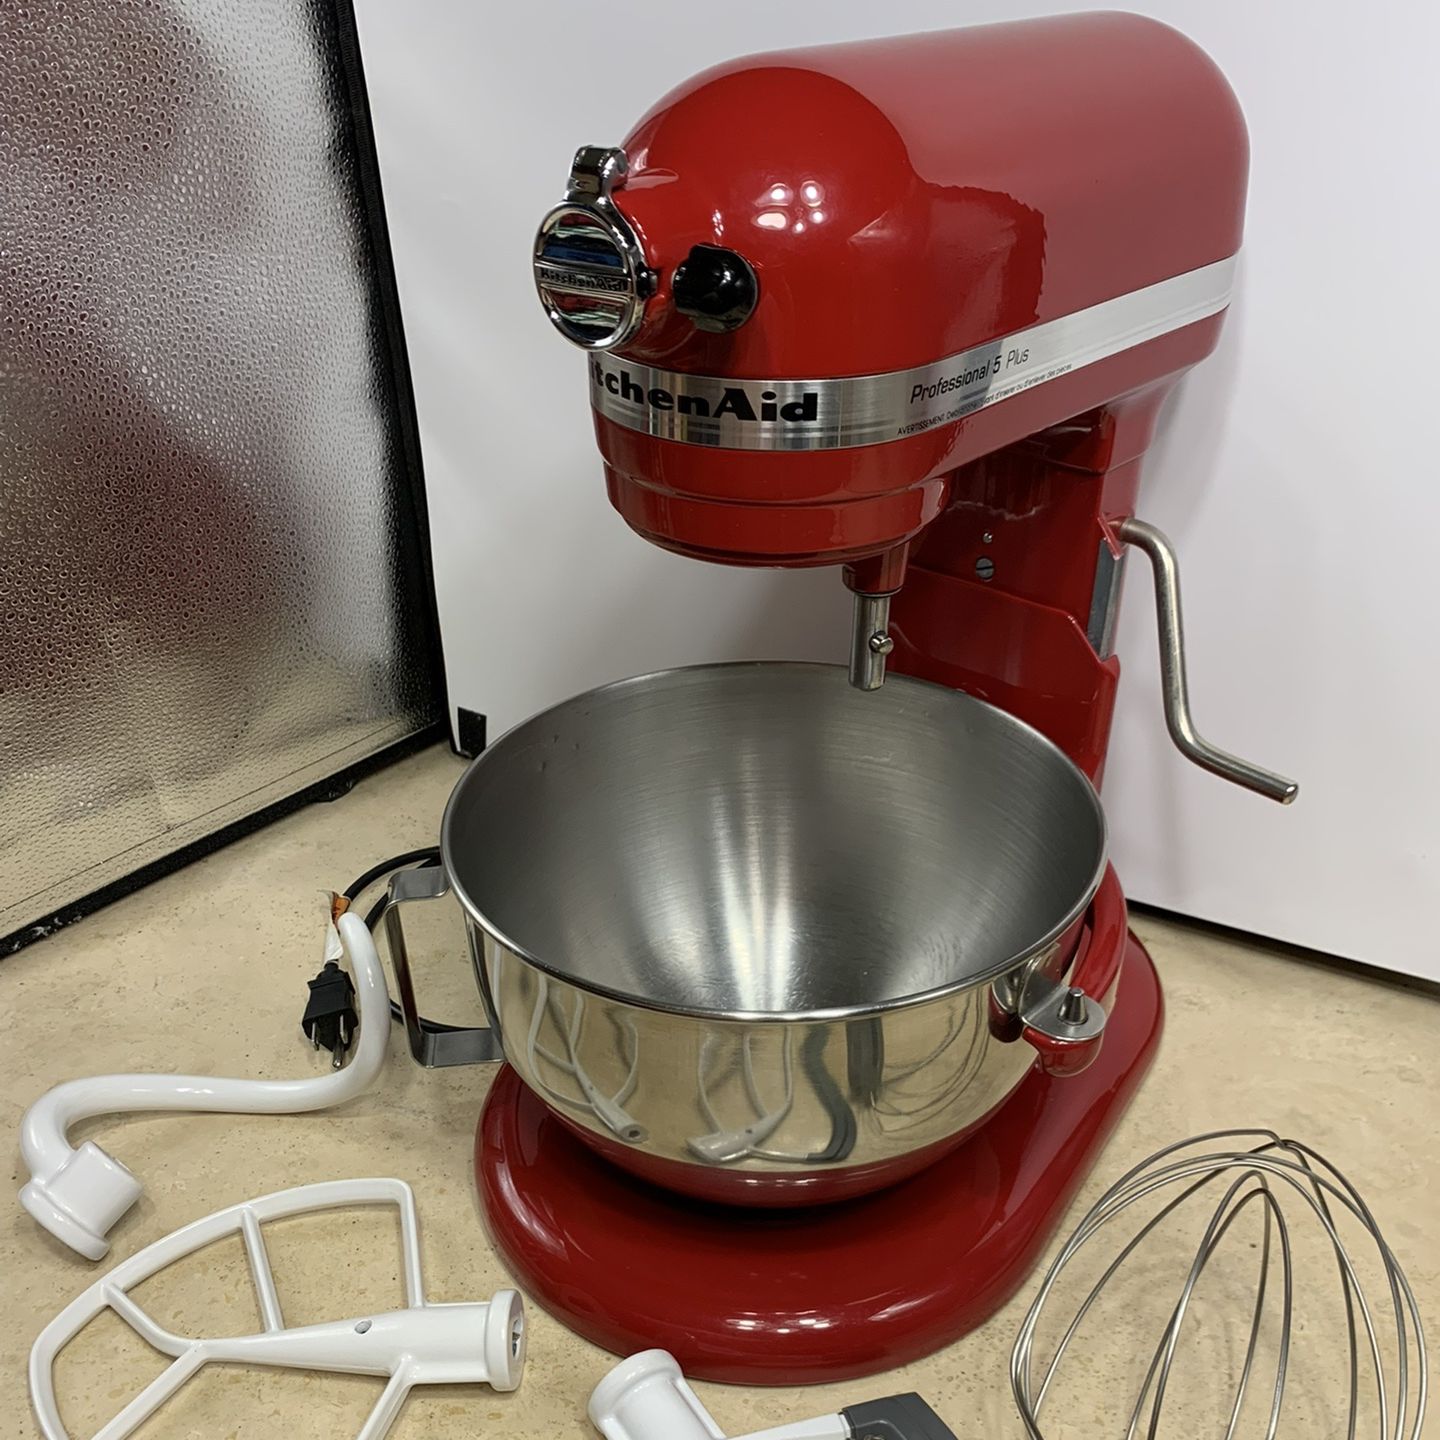 KitchenAid Lift Stand Mixer 5.5 Quart Bowl Lift Stand Mixer for Sale in  Irvine, CA - OfferUp